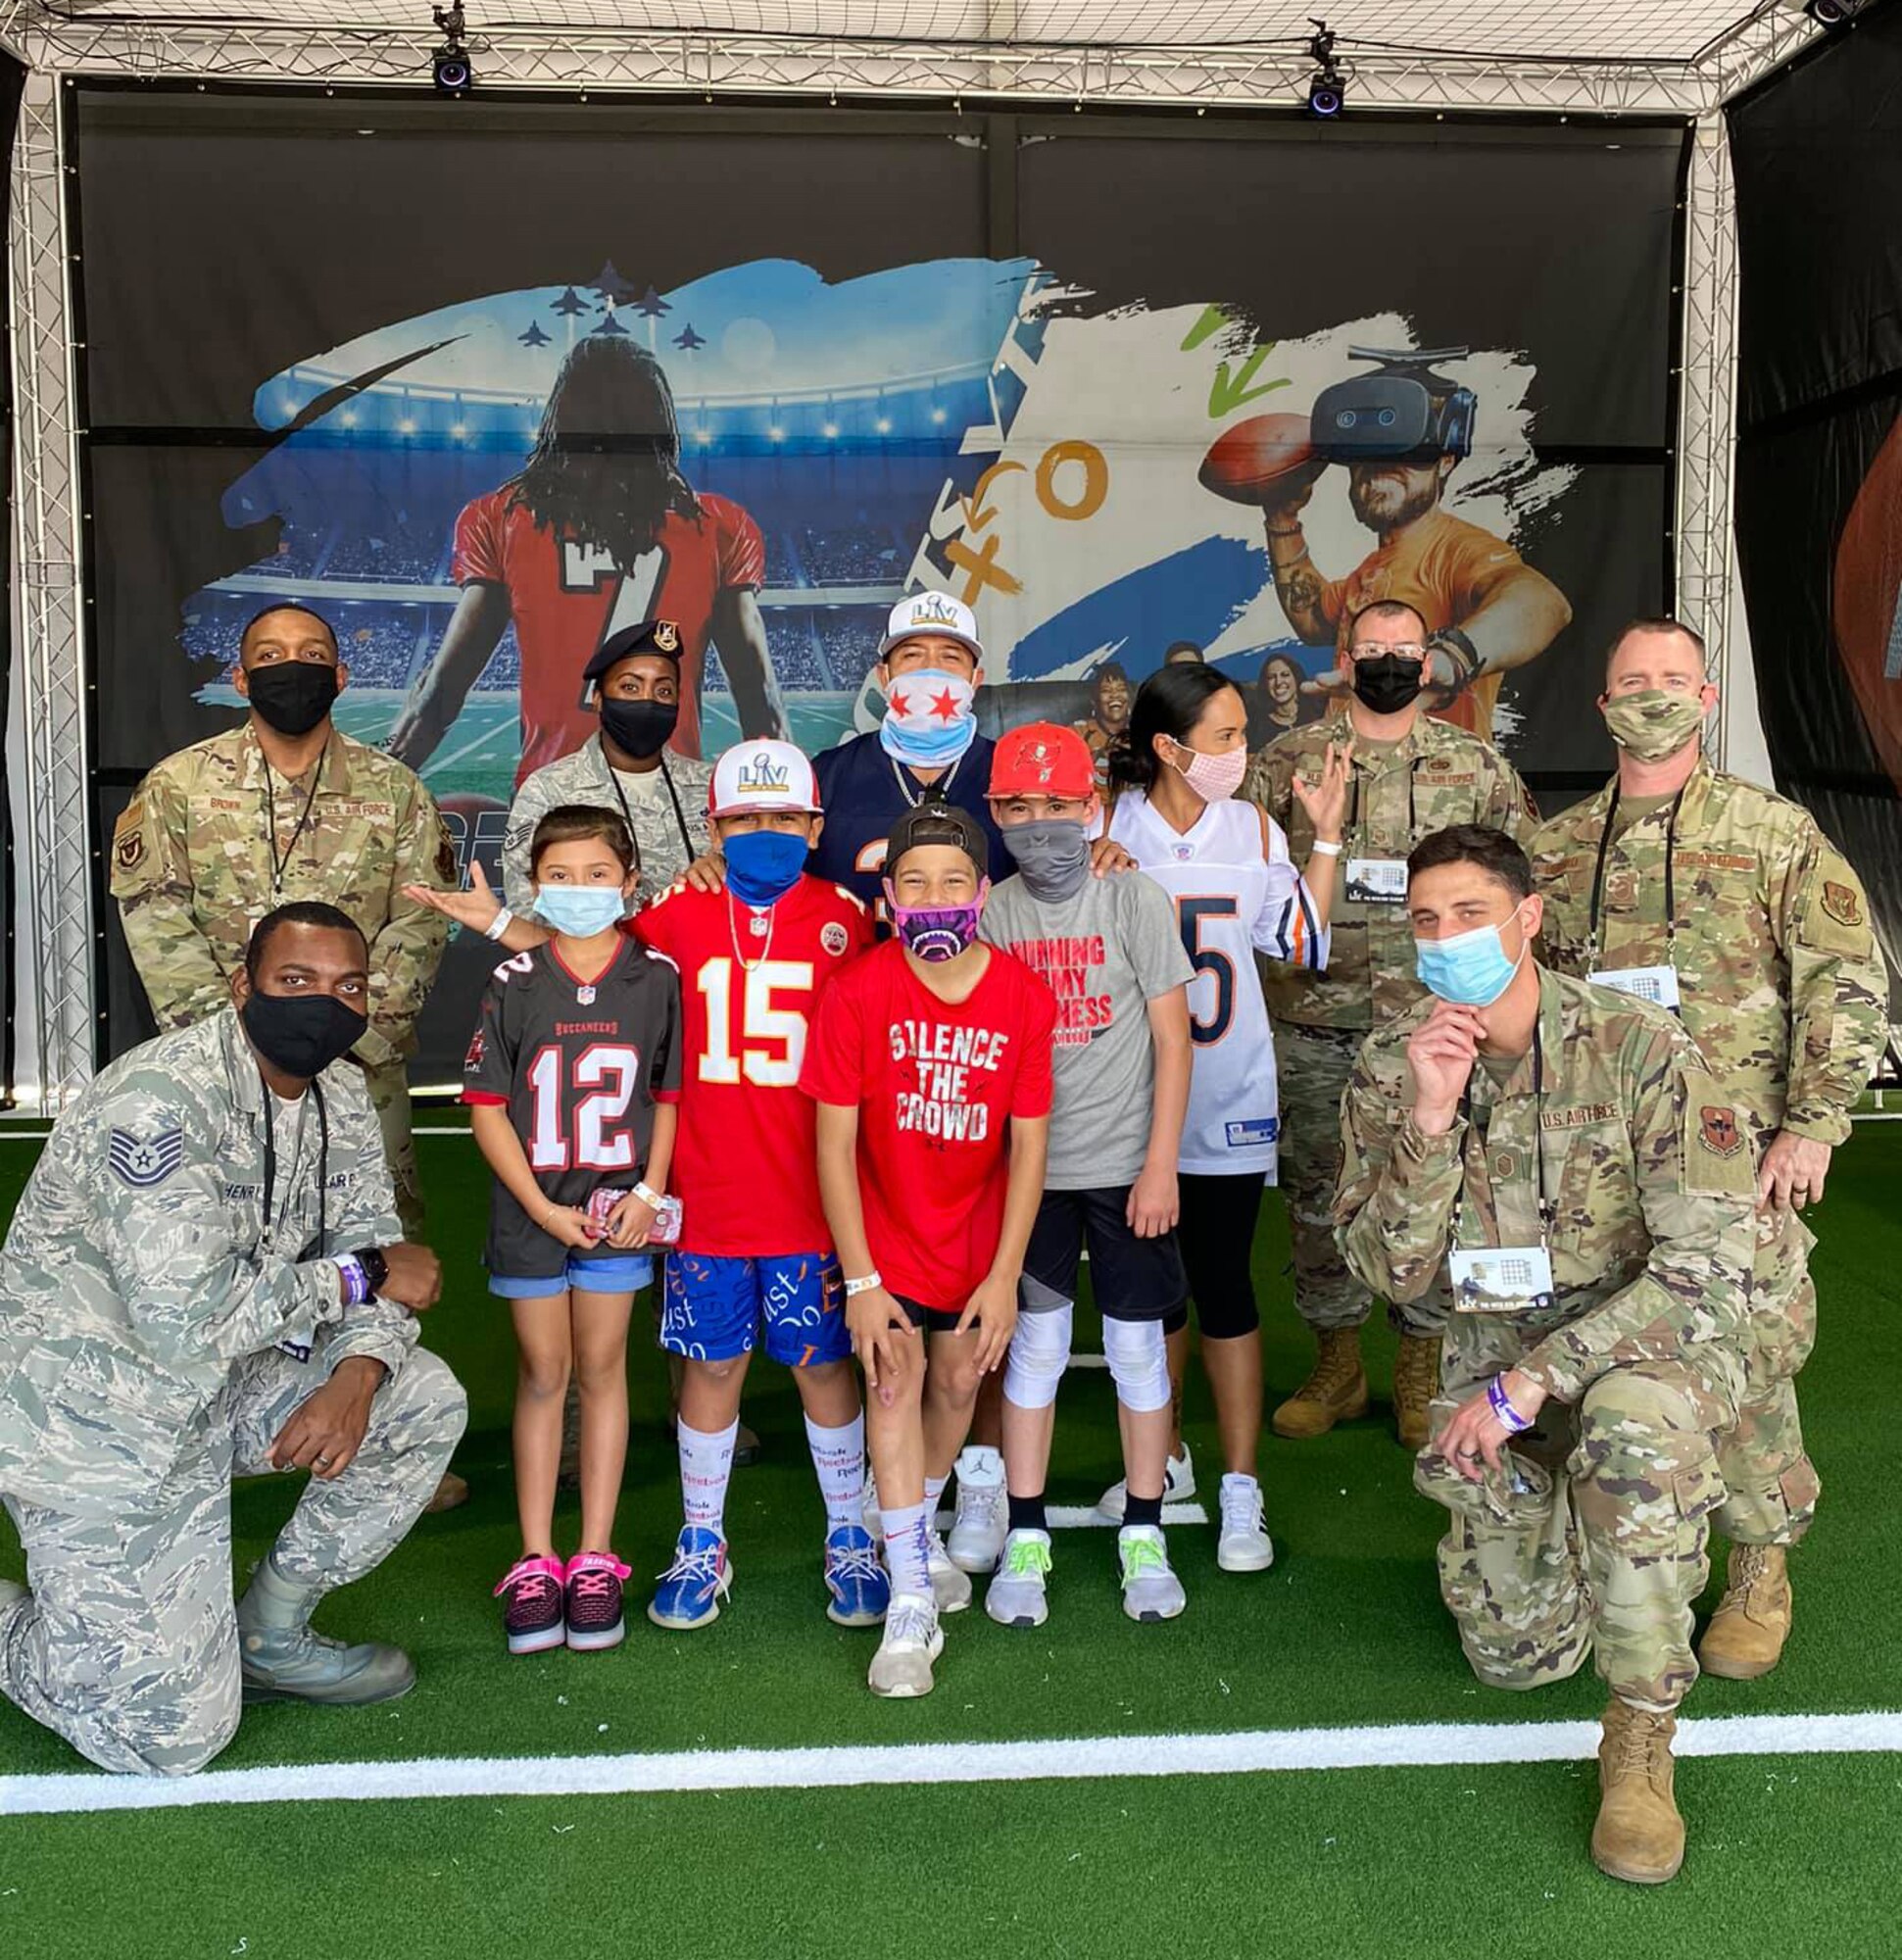 Total Force recruiters posed with a group of fans at the Super Bowl LV Experience outside of Raymond James Stadium in Tampa, Florida, Jan. 31, 2021.